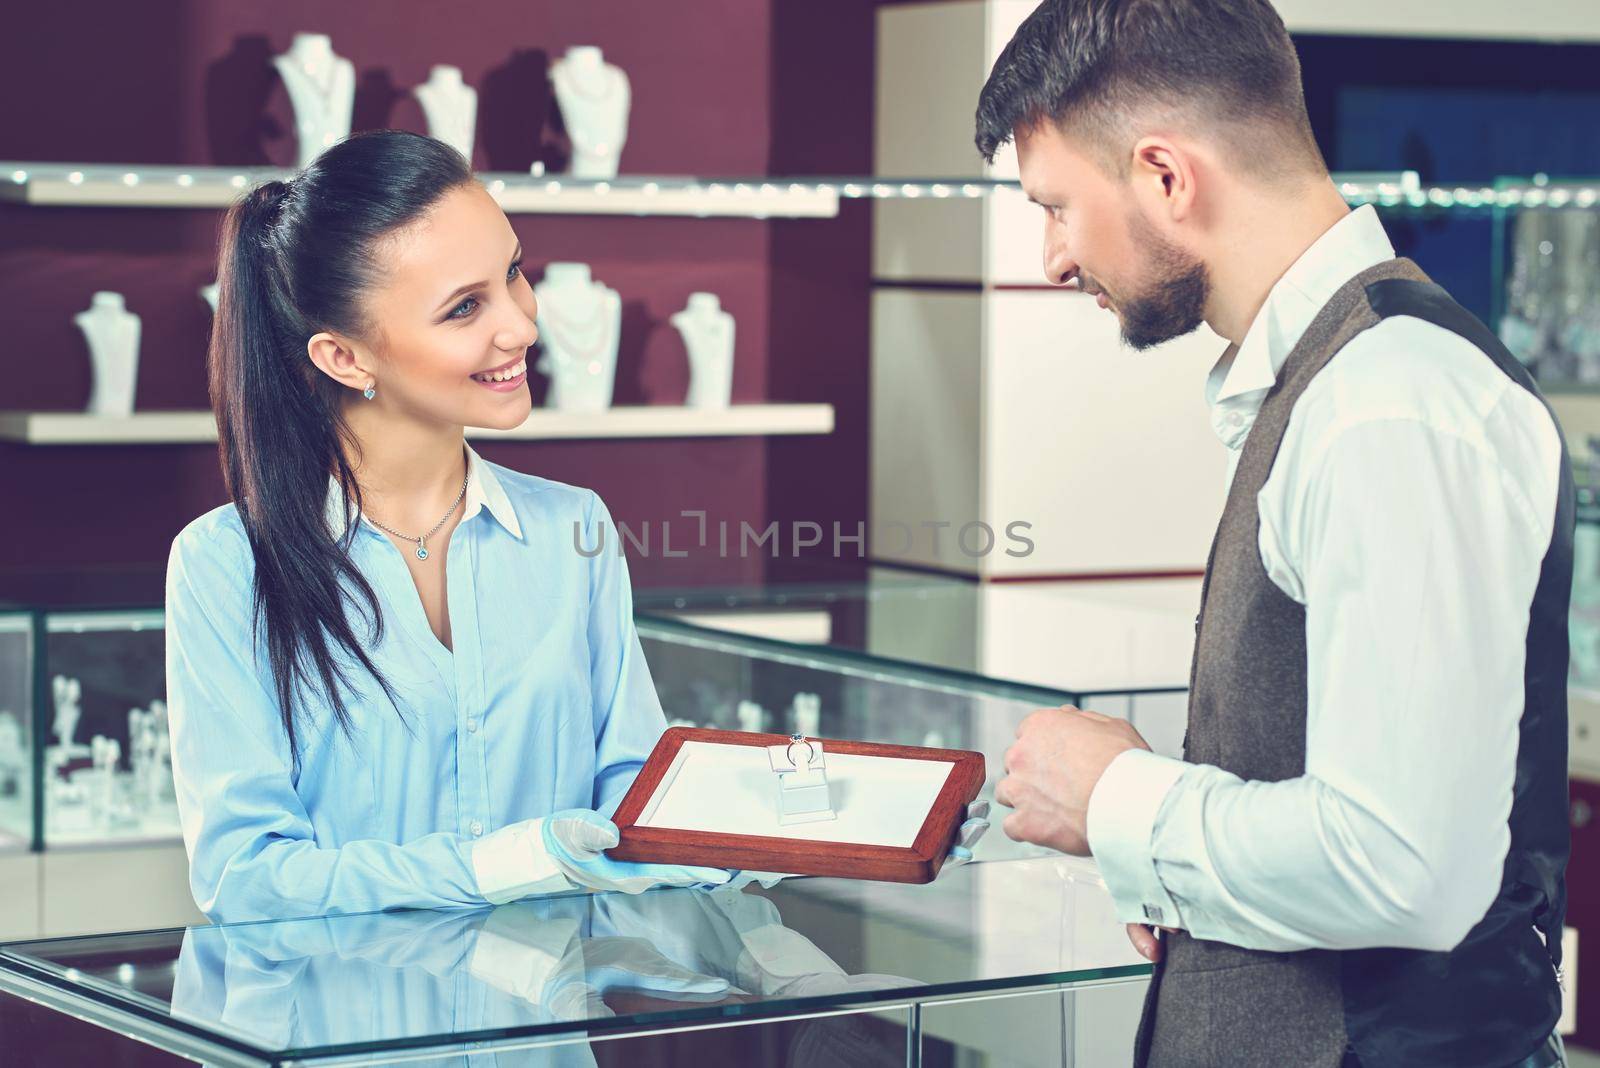 Help of a pro. Professional female jeweler smiling helping her male customer showing him diamond engagement ring to buy service helpful professional job occupation worker shopping people concept